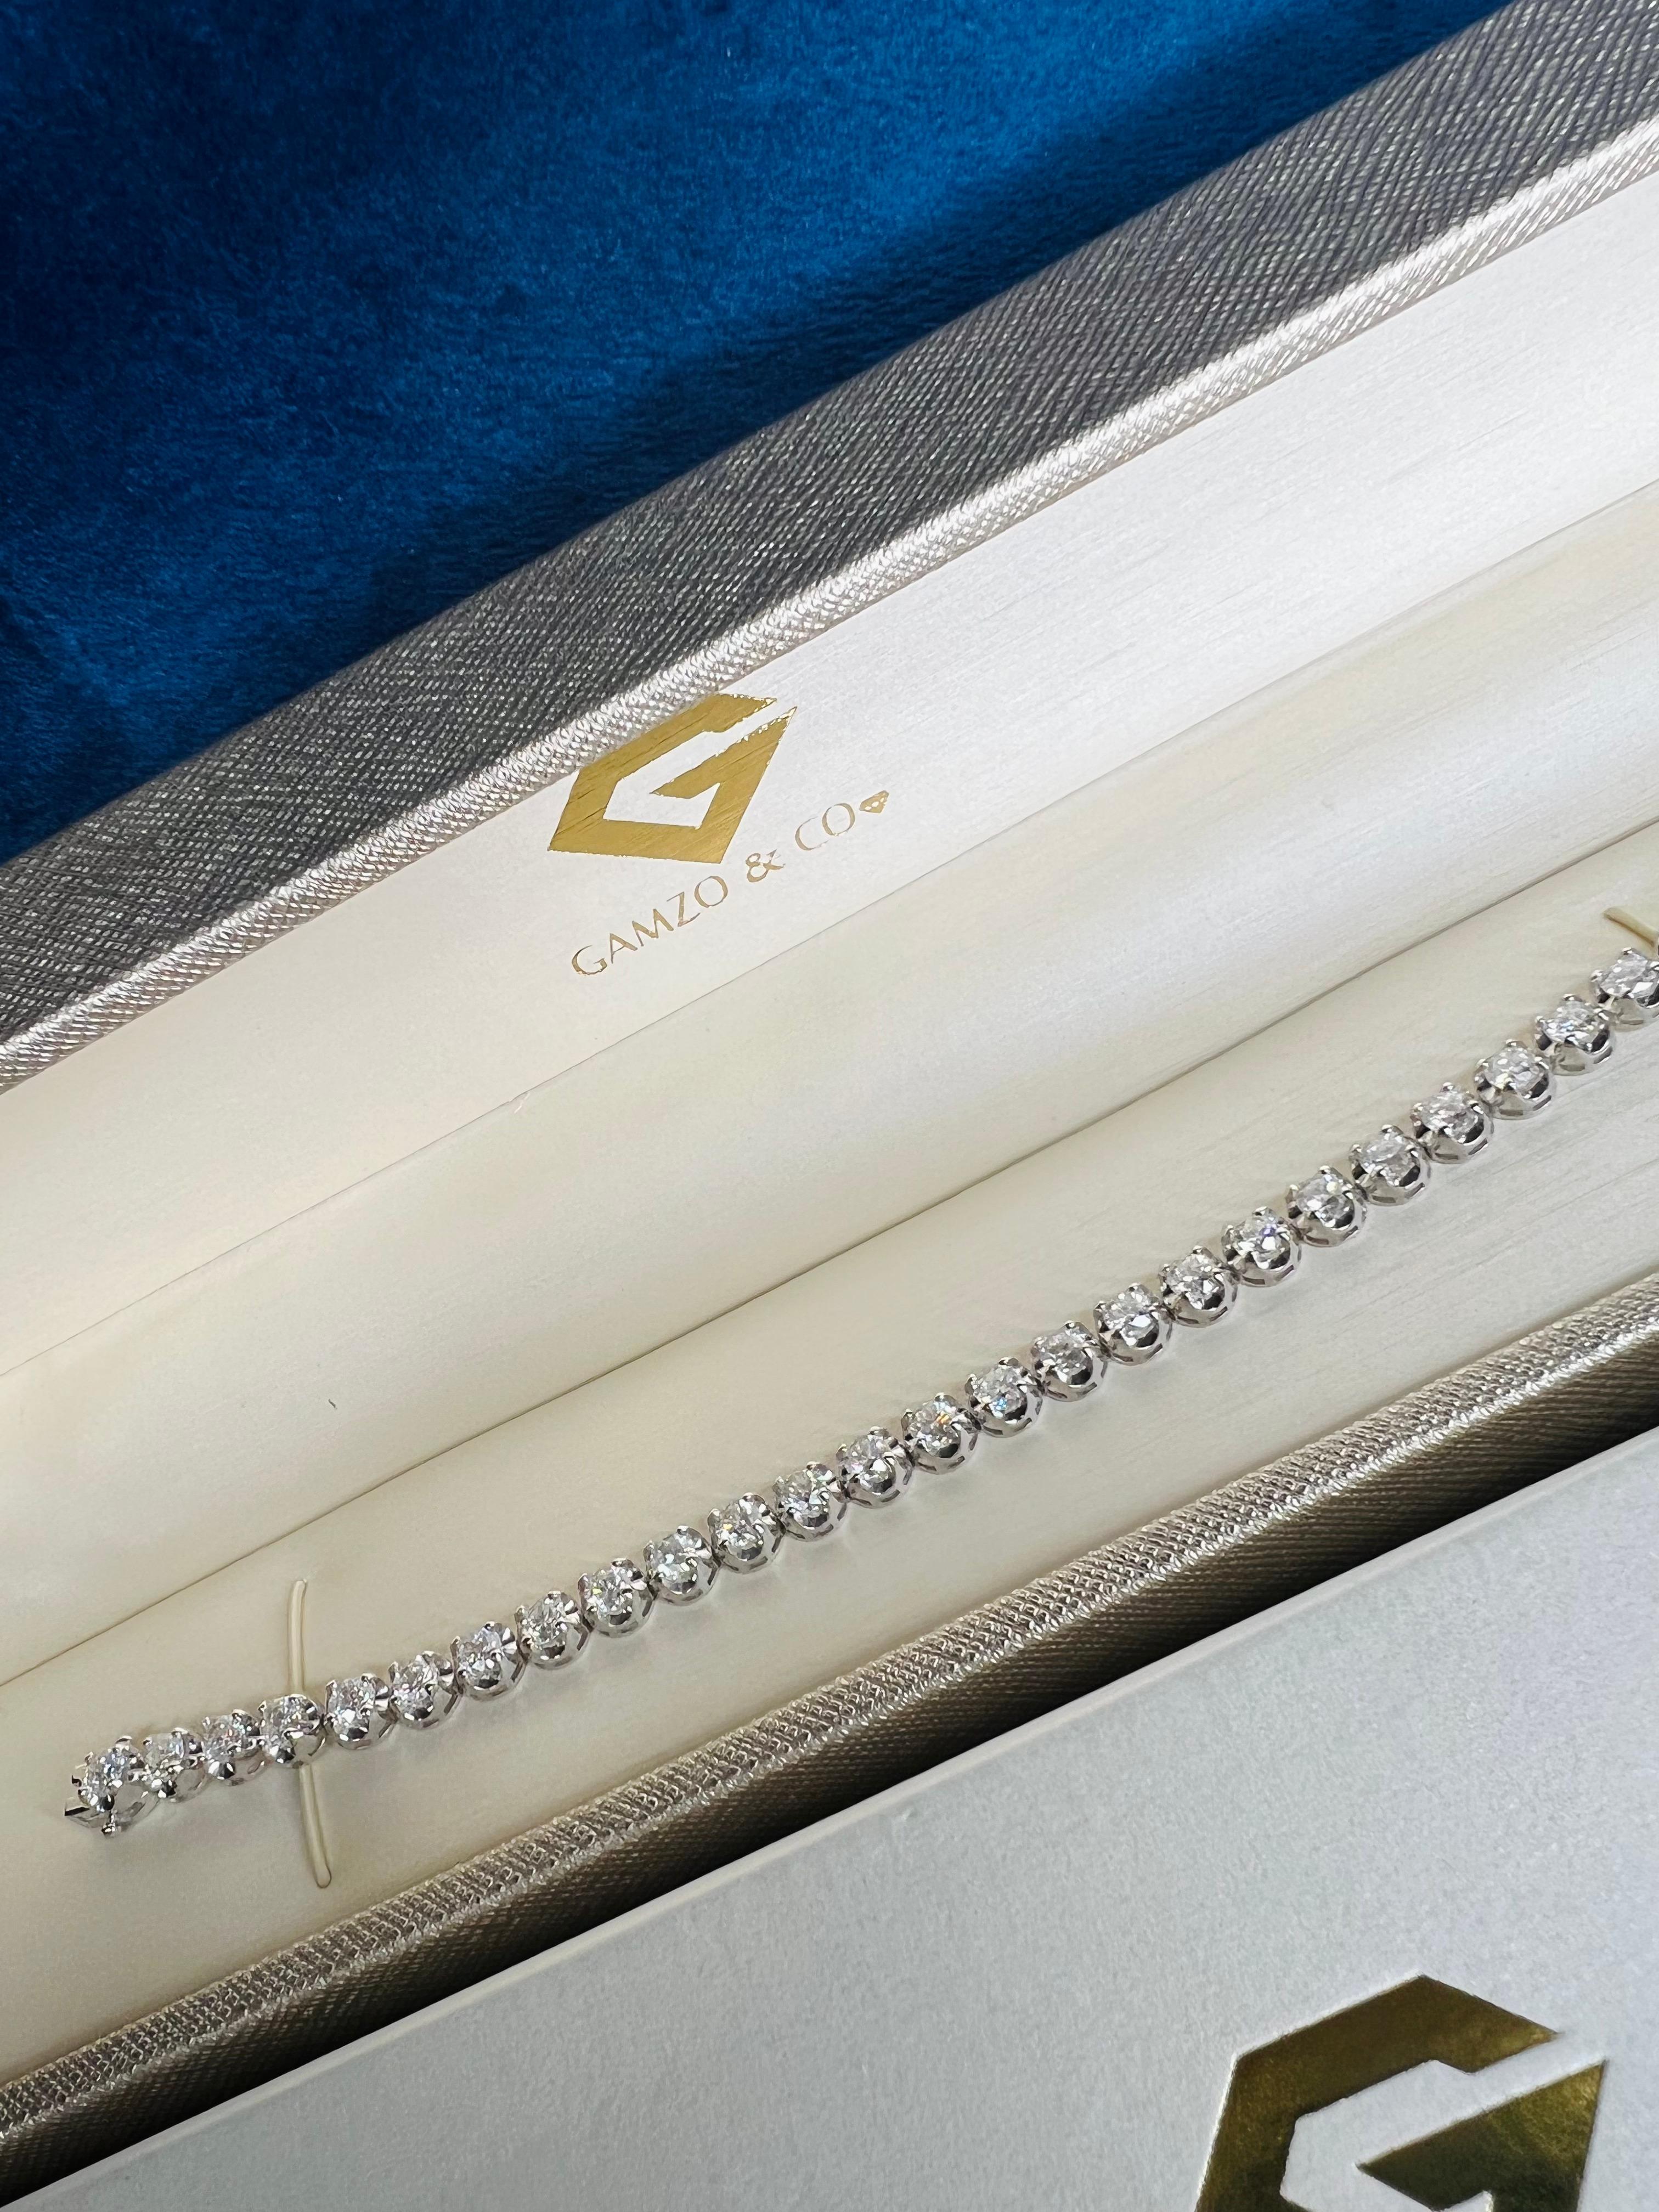 These beautiful round diamonds dance around your wrist as they absorb light and attention.
Metal: 14k Gold
Diamond Cut: Round
Diamond Total Carats: 7ct
Diamond Clarity: VS
Diamond Color: F
Color: White Gold
Bracelet Length: 5.5 Inches 
Included with